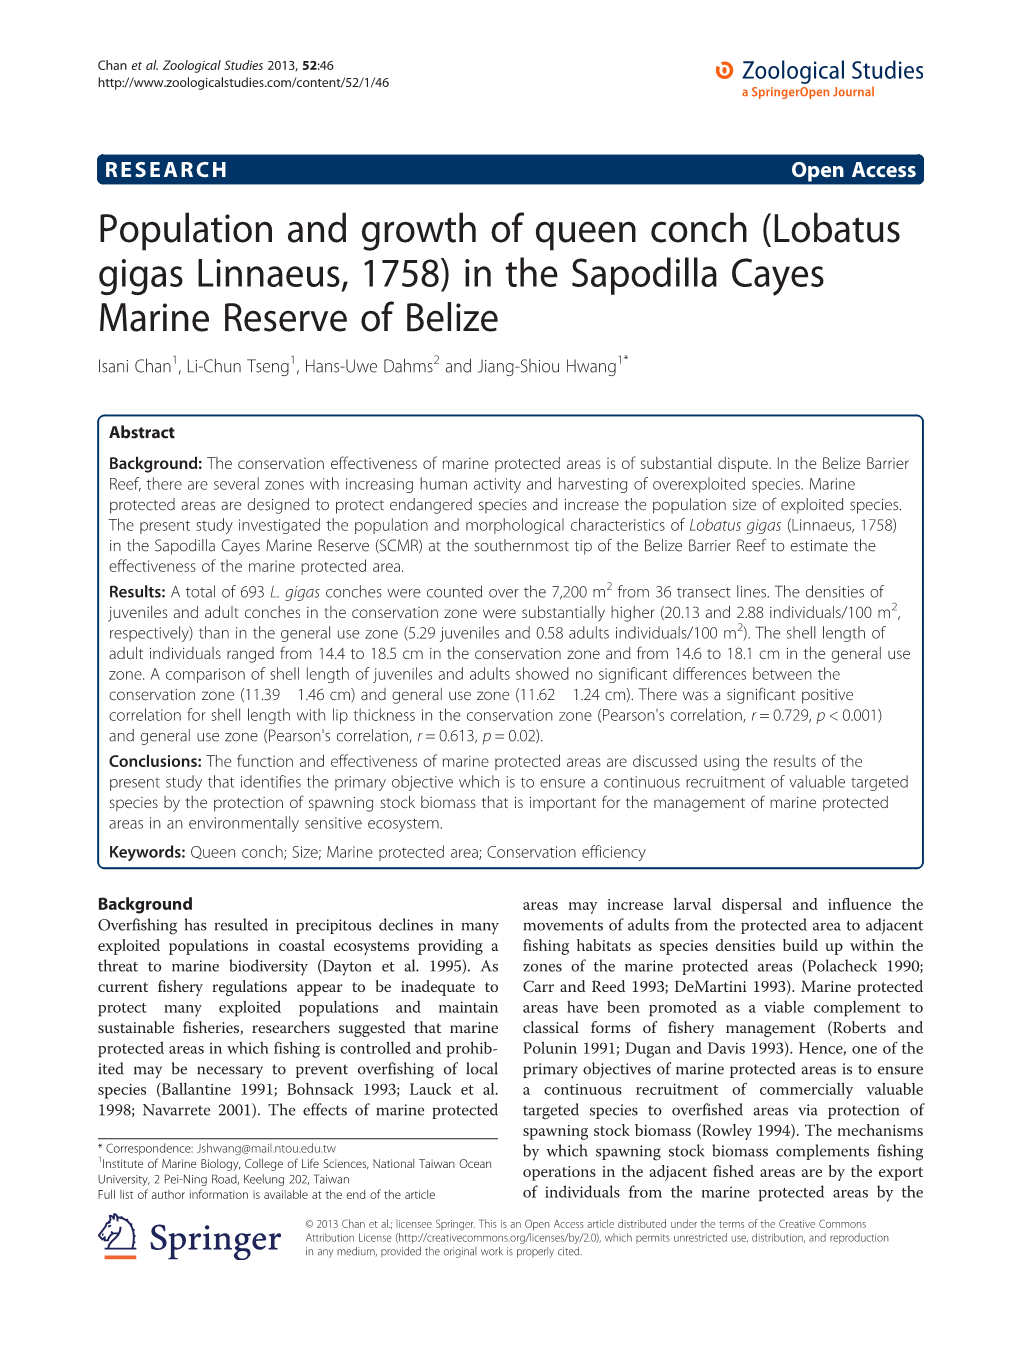 Population and Growth of Queen Conch (Lobatus Gigas Linnaeus